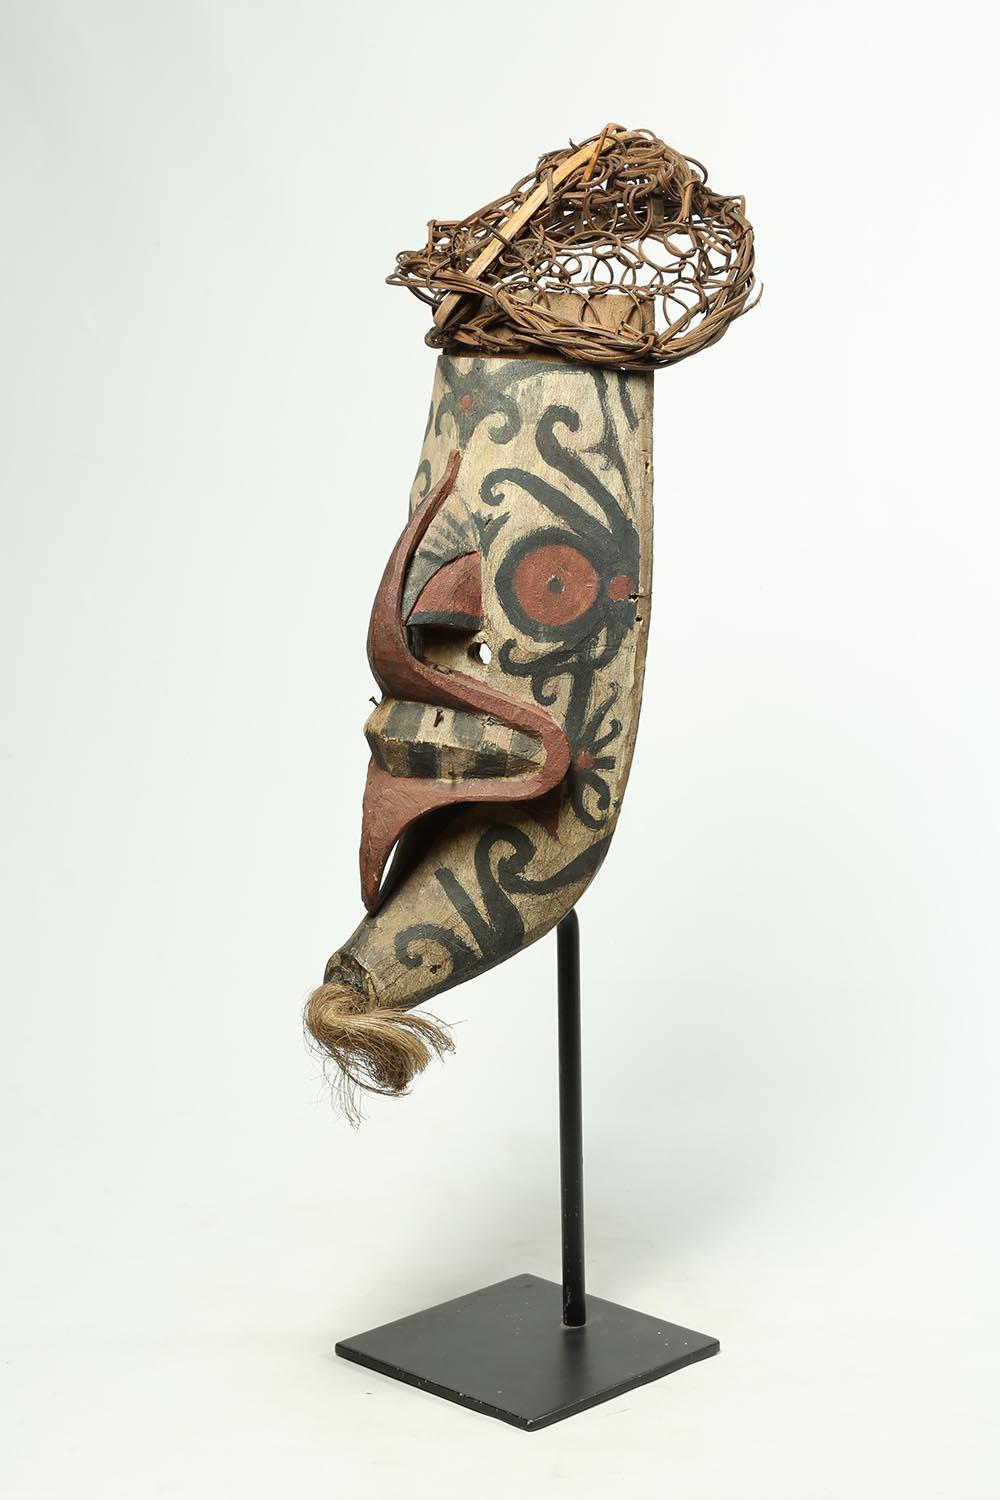 Hand-Carved Tribal Wood and Pigment Dayak Hudoq Mask on Stand, Early 20th Century Borneo